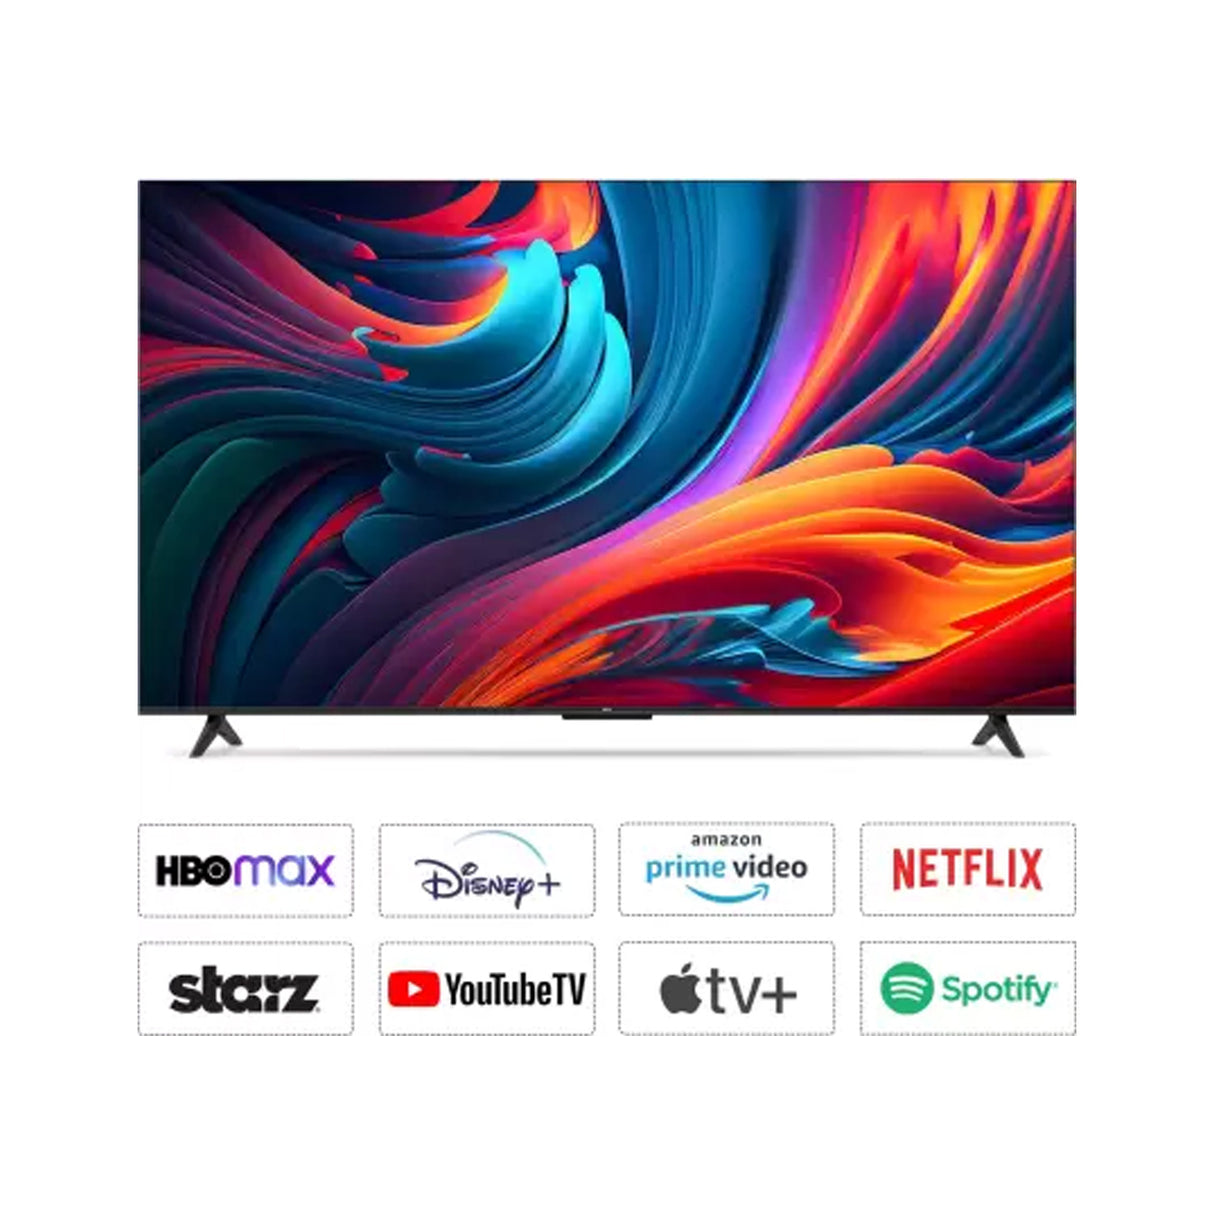 Immerse Yourself in Entertainment: TCL 65P635 PRO 65" 4K UHD Google TV